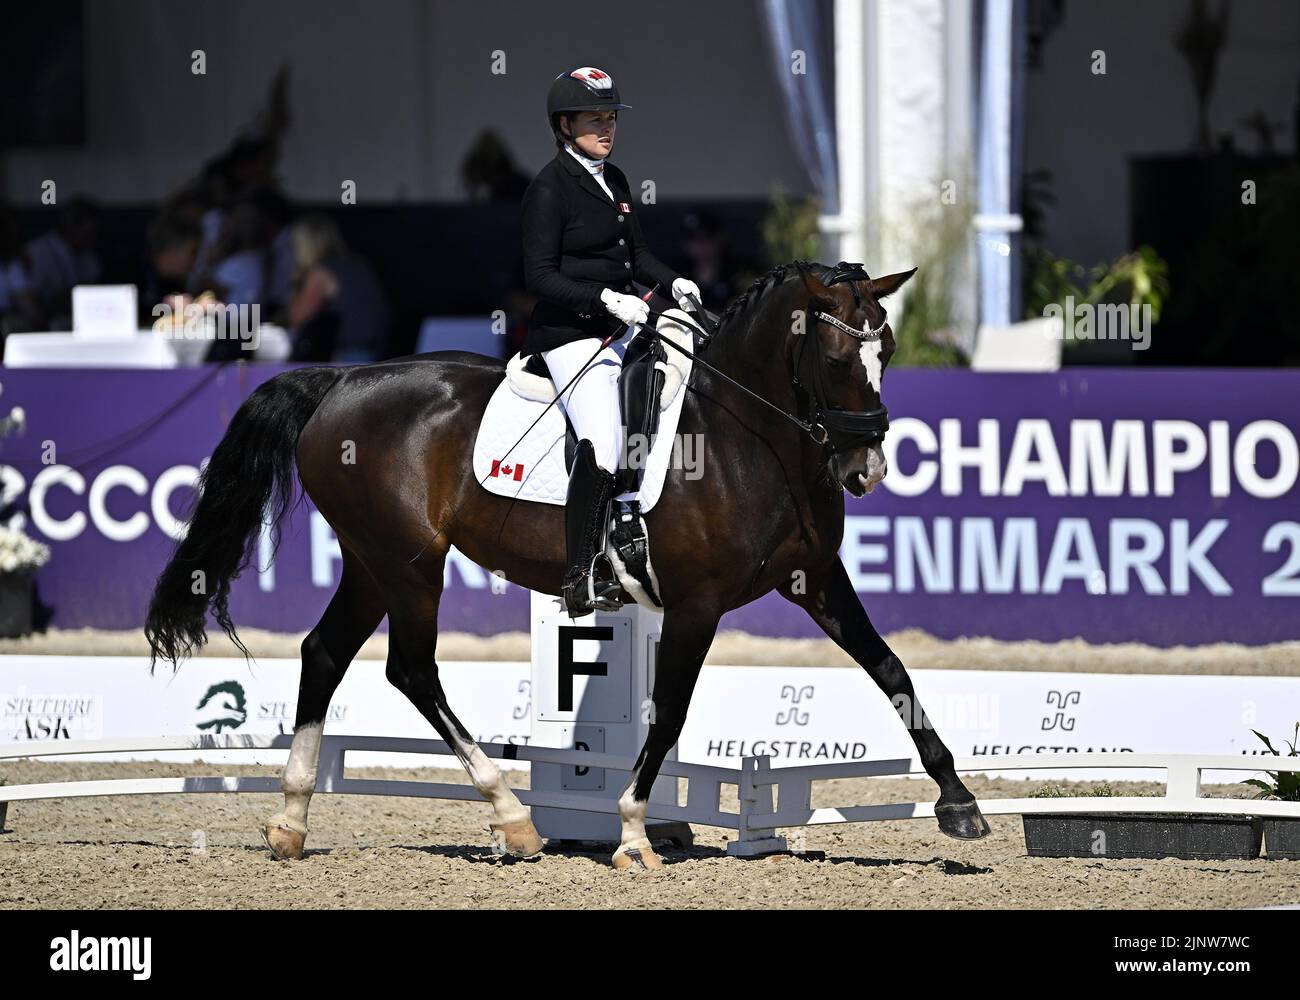 Herning, Denmark. 13th Aug, 2022. World Equestrian Games.Roberta Sheffield (CAN) riding FAIRUZA during the FEI Para Dressage Team championships - Grade III. Credit: Sport In Pictures/Alamy Live News Stock Photo